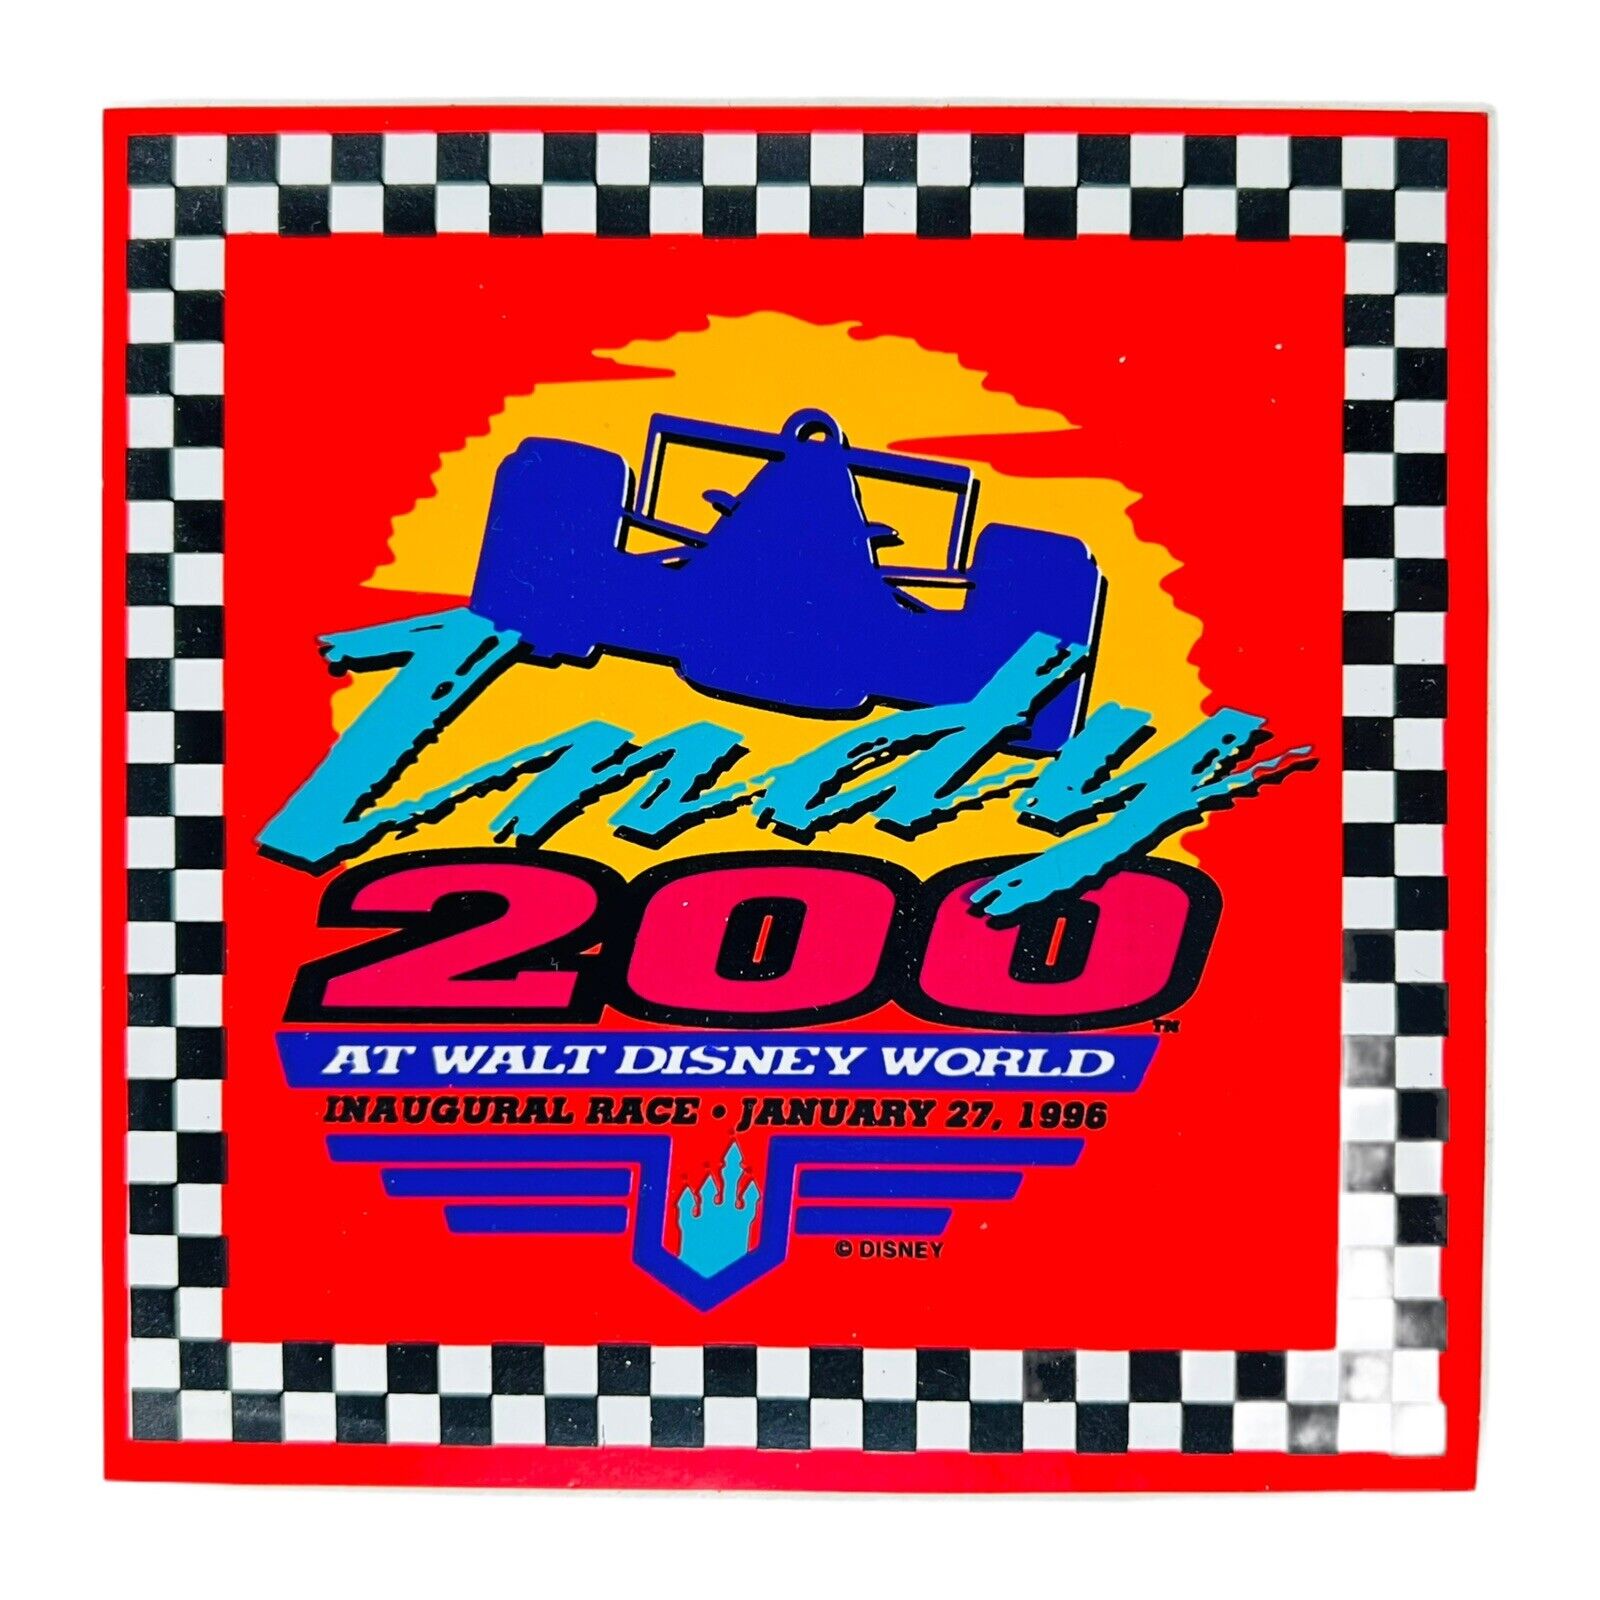 Indy 200 At Walt Disney World Inaugural Race January 27 1996 Sticker Decal 4.5”